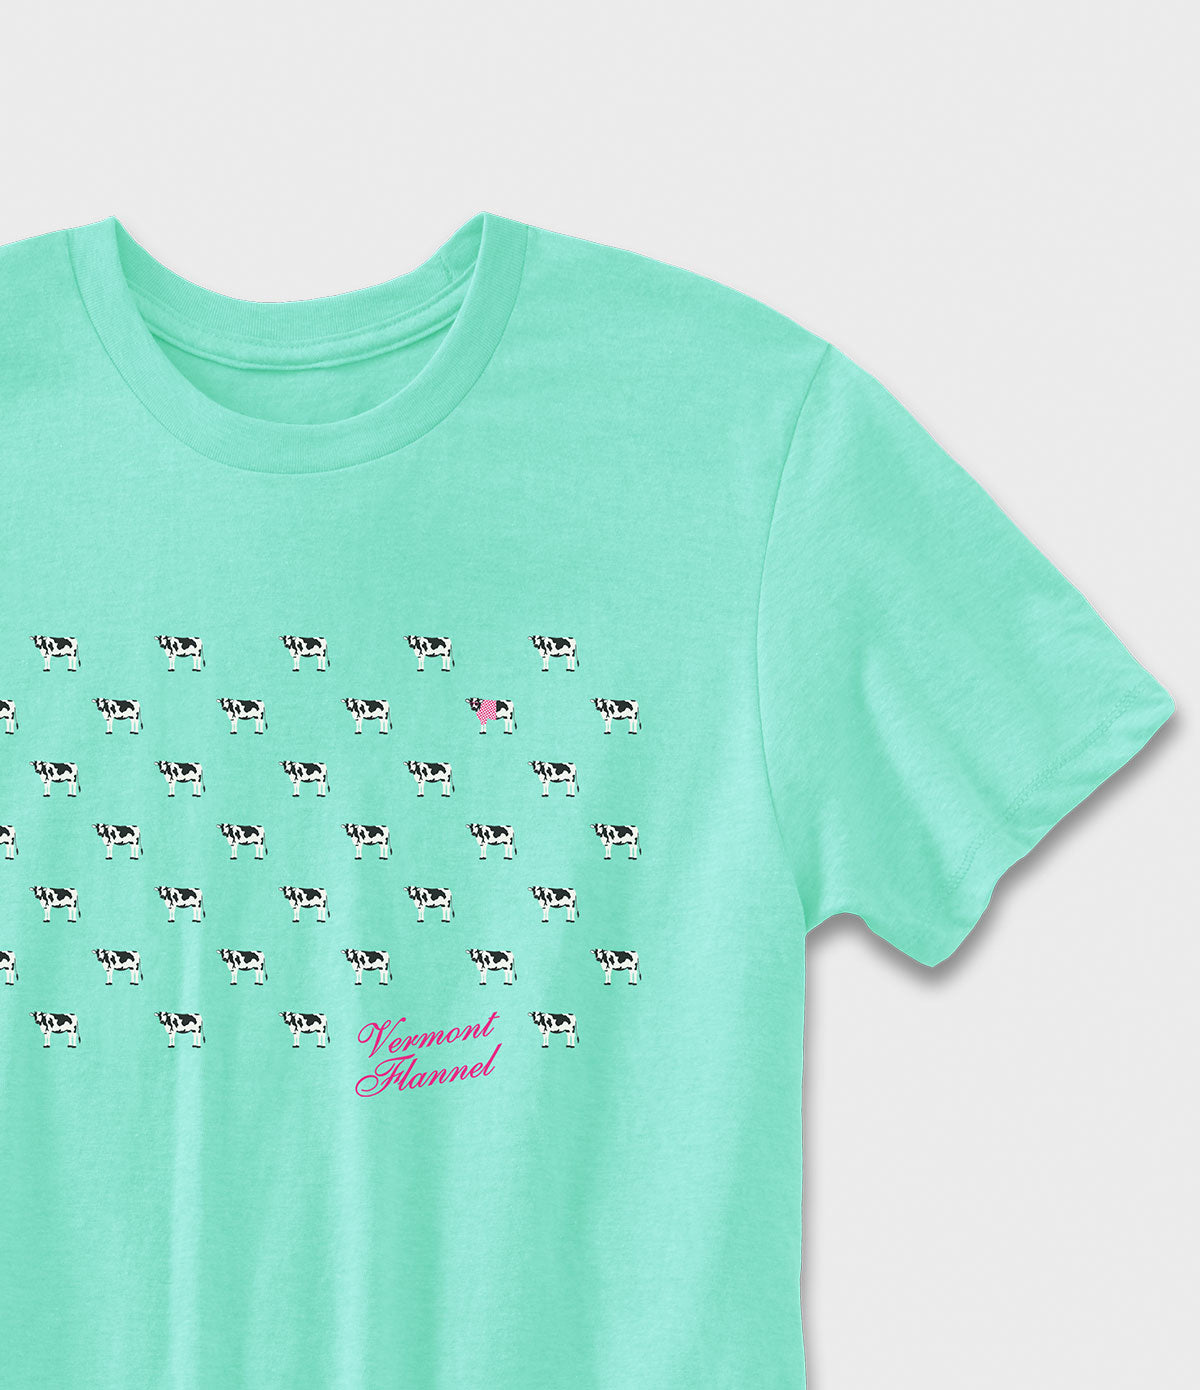 Teal '90s Throwback Cow-a-Dot Graphic T-Shirt